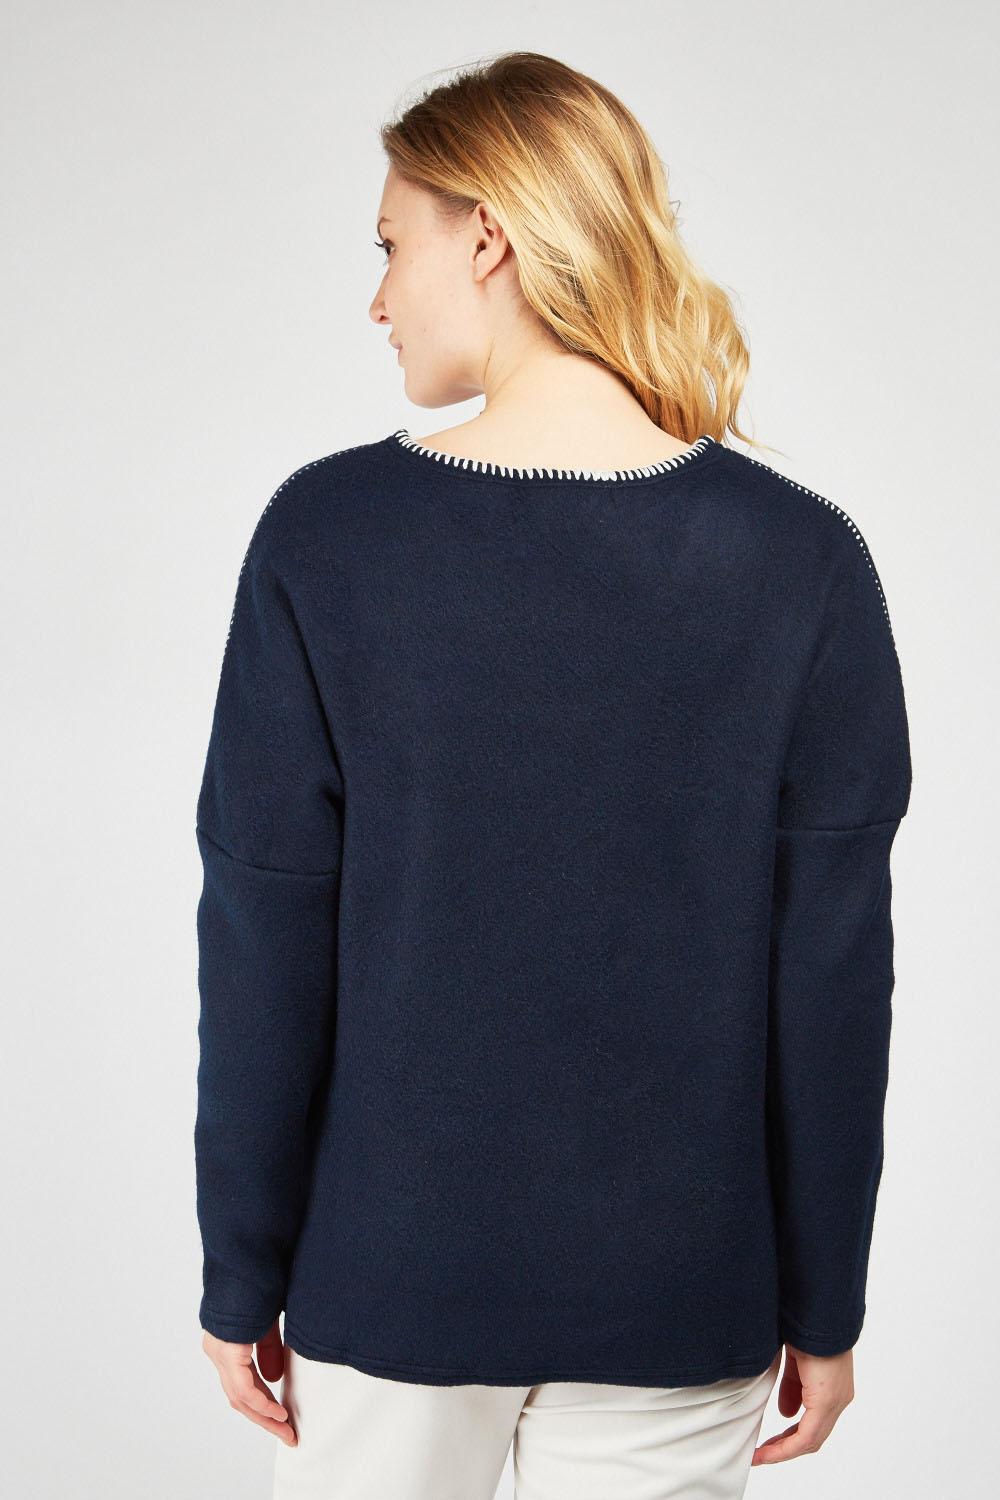 Stitched Neck Thick Jumper - Just $2